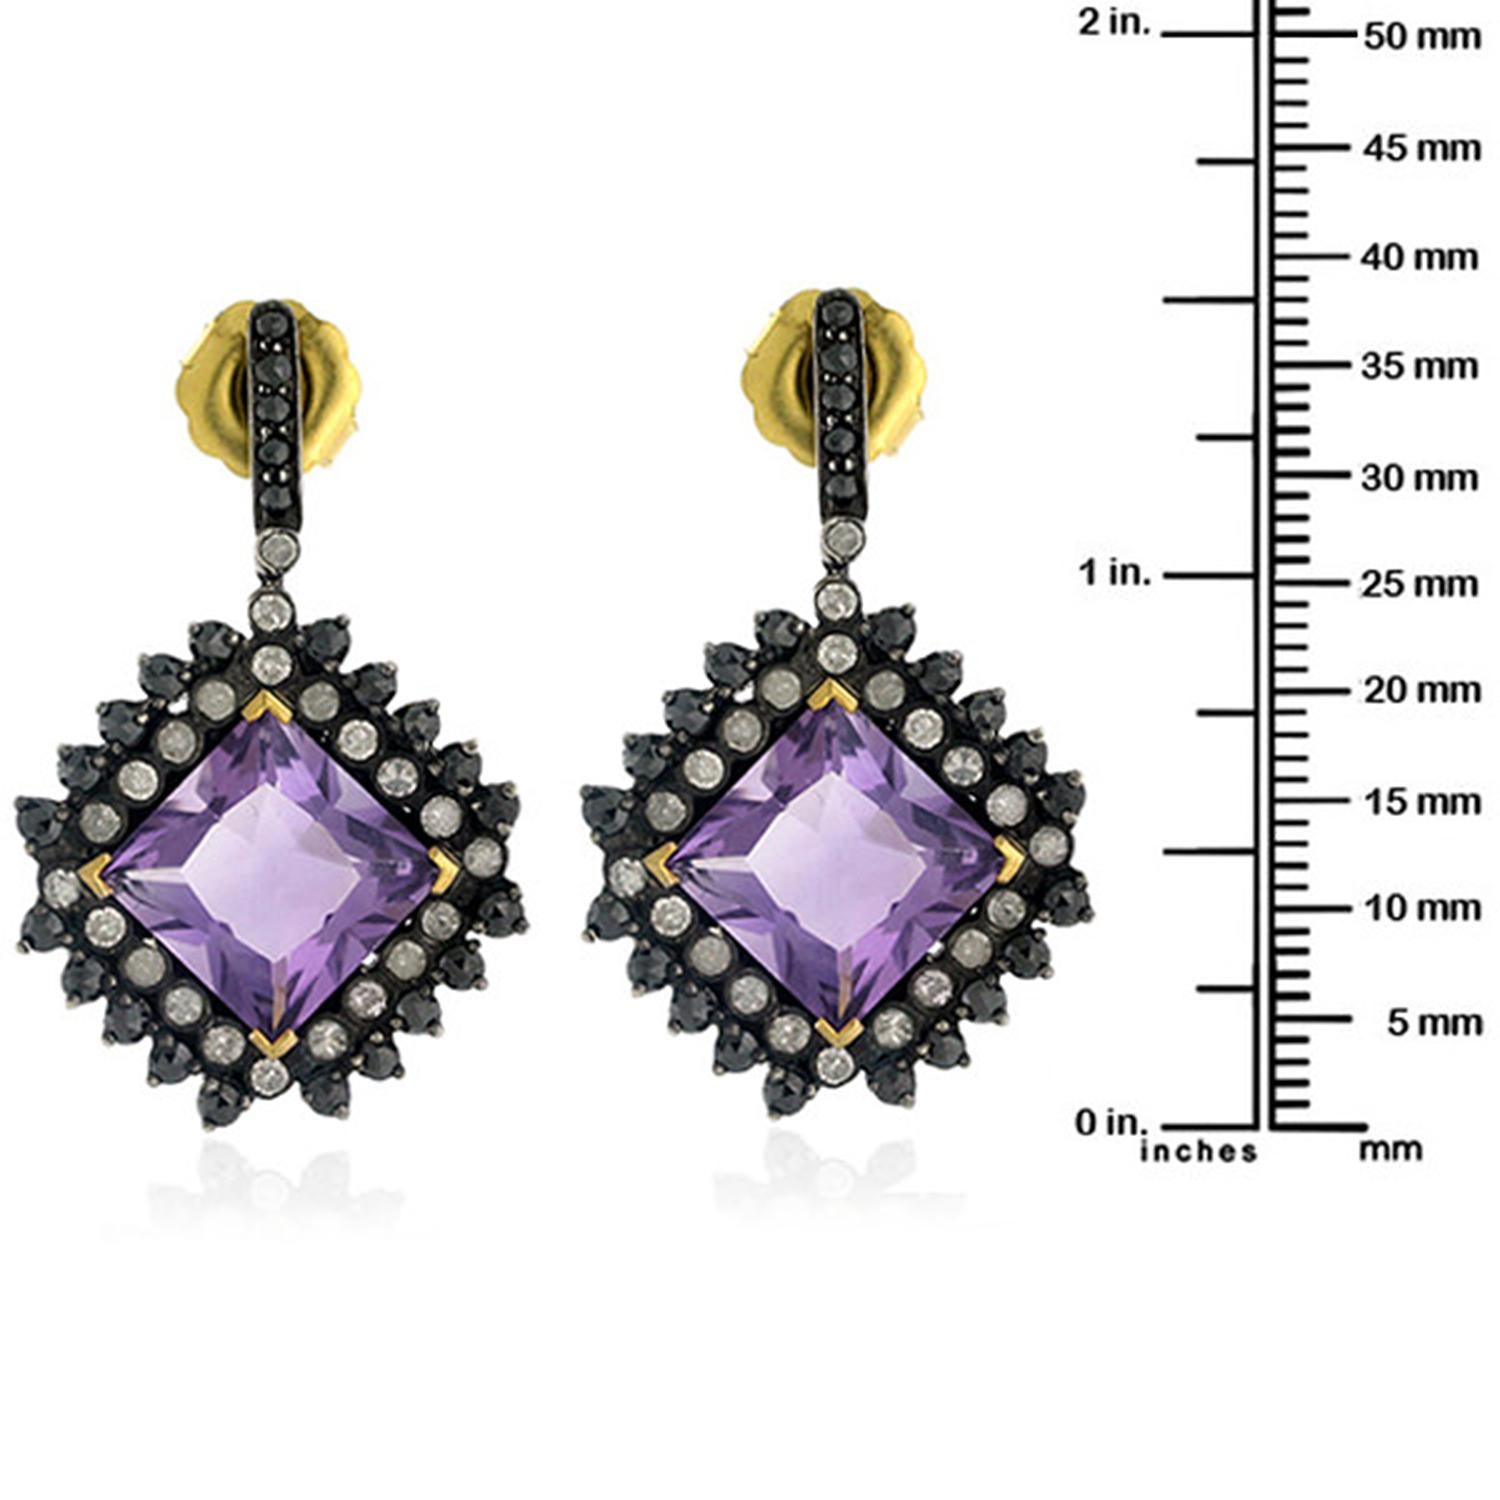 Mixed Cut 15.25cts Amethyst Drop Earring with Black and White Diamond in Silver and Gold For Sale